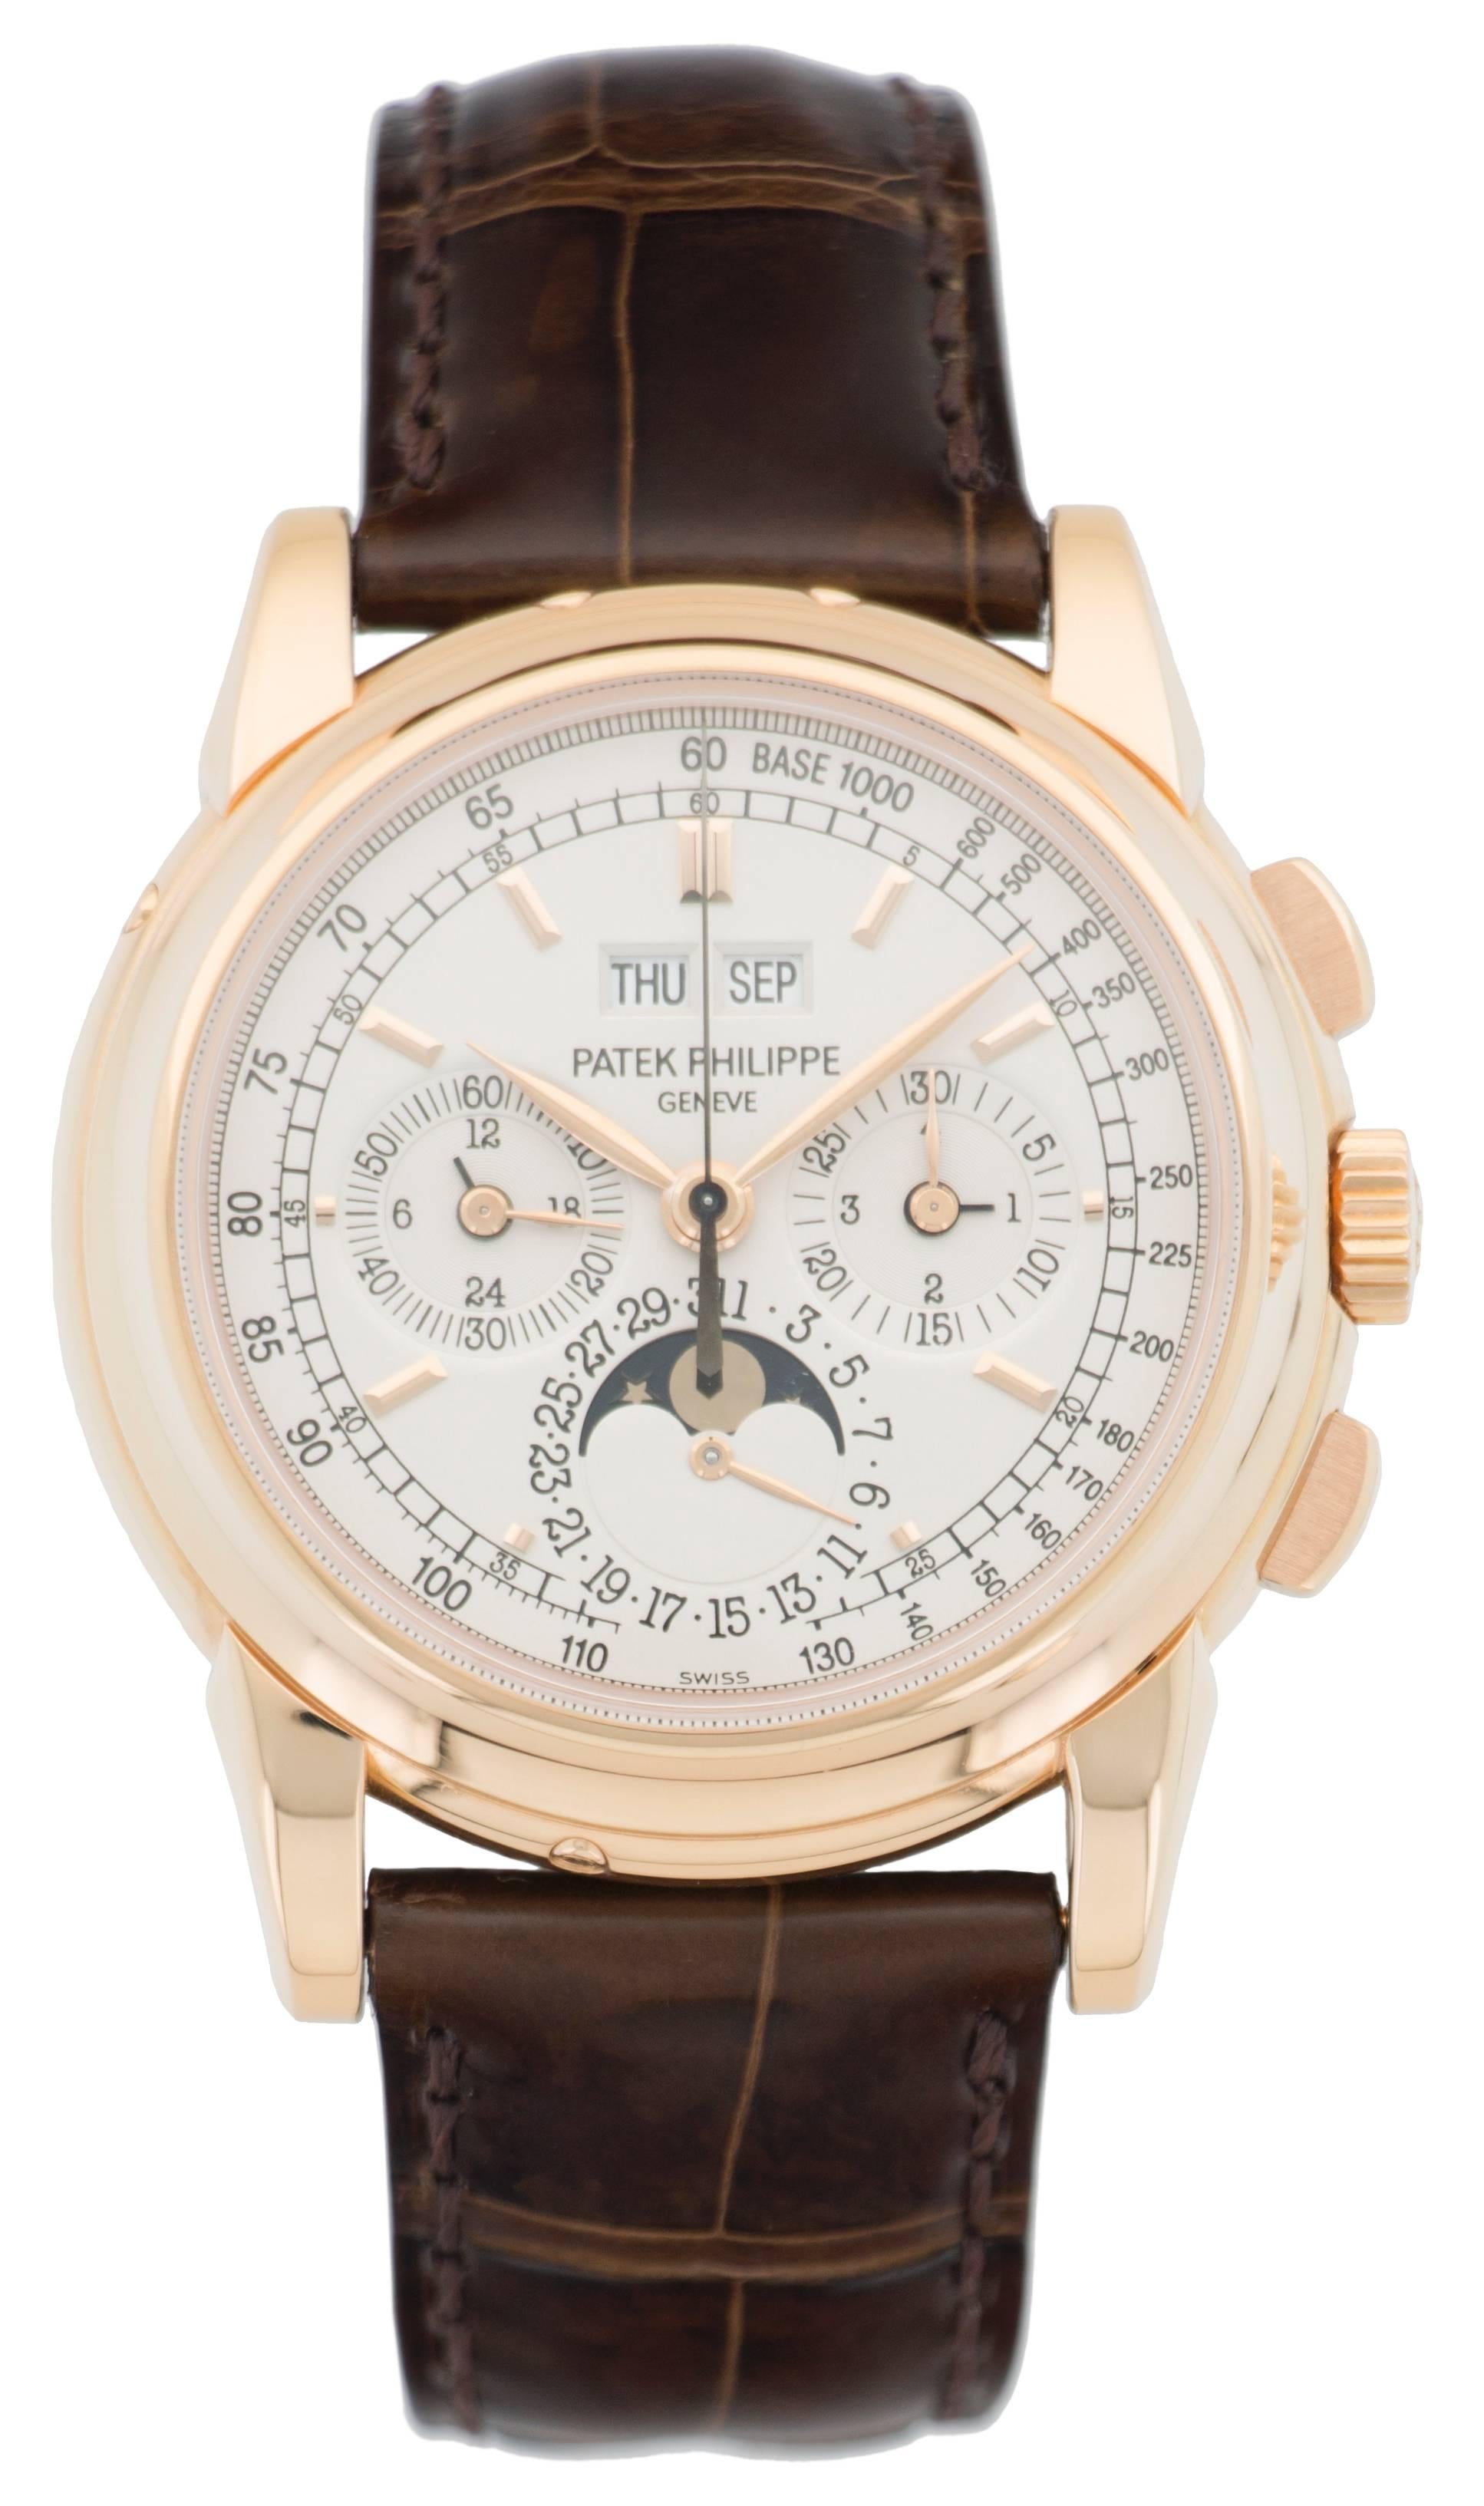 Writing about the ref. 5970, watch journalist website Hodinkee put it well stating 